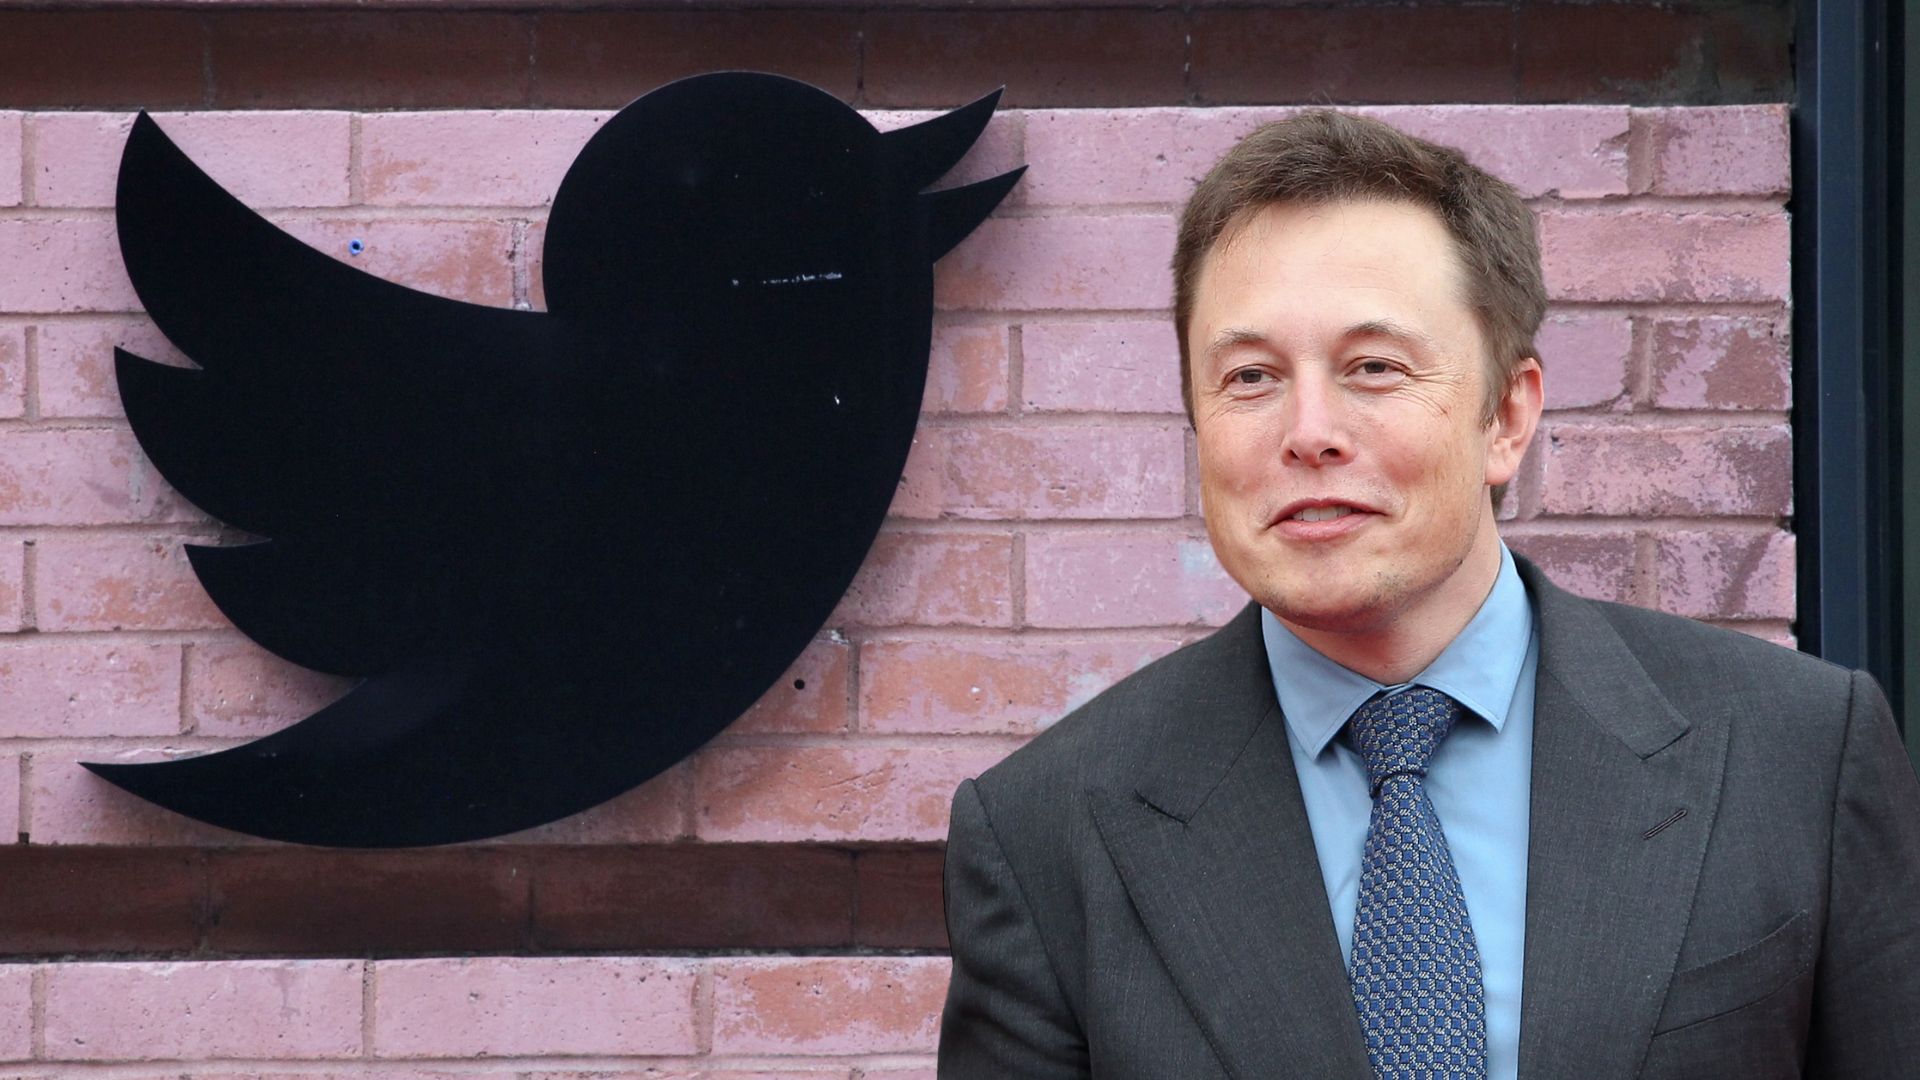 Go to the office or you’re out, Musk told Twitter employees